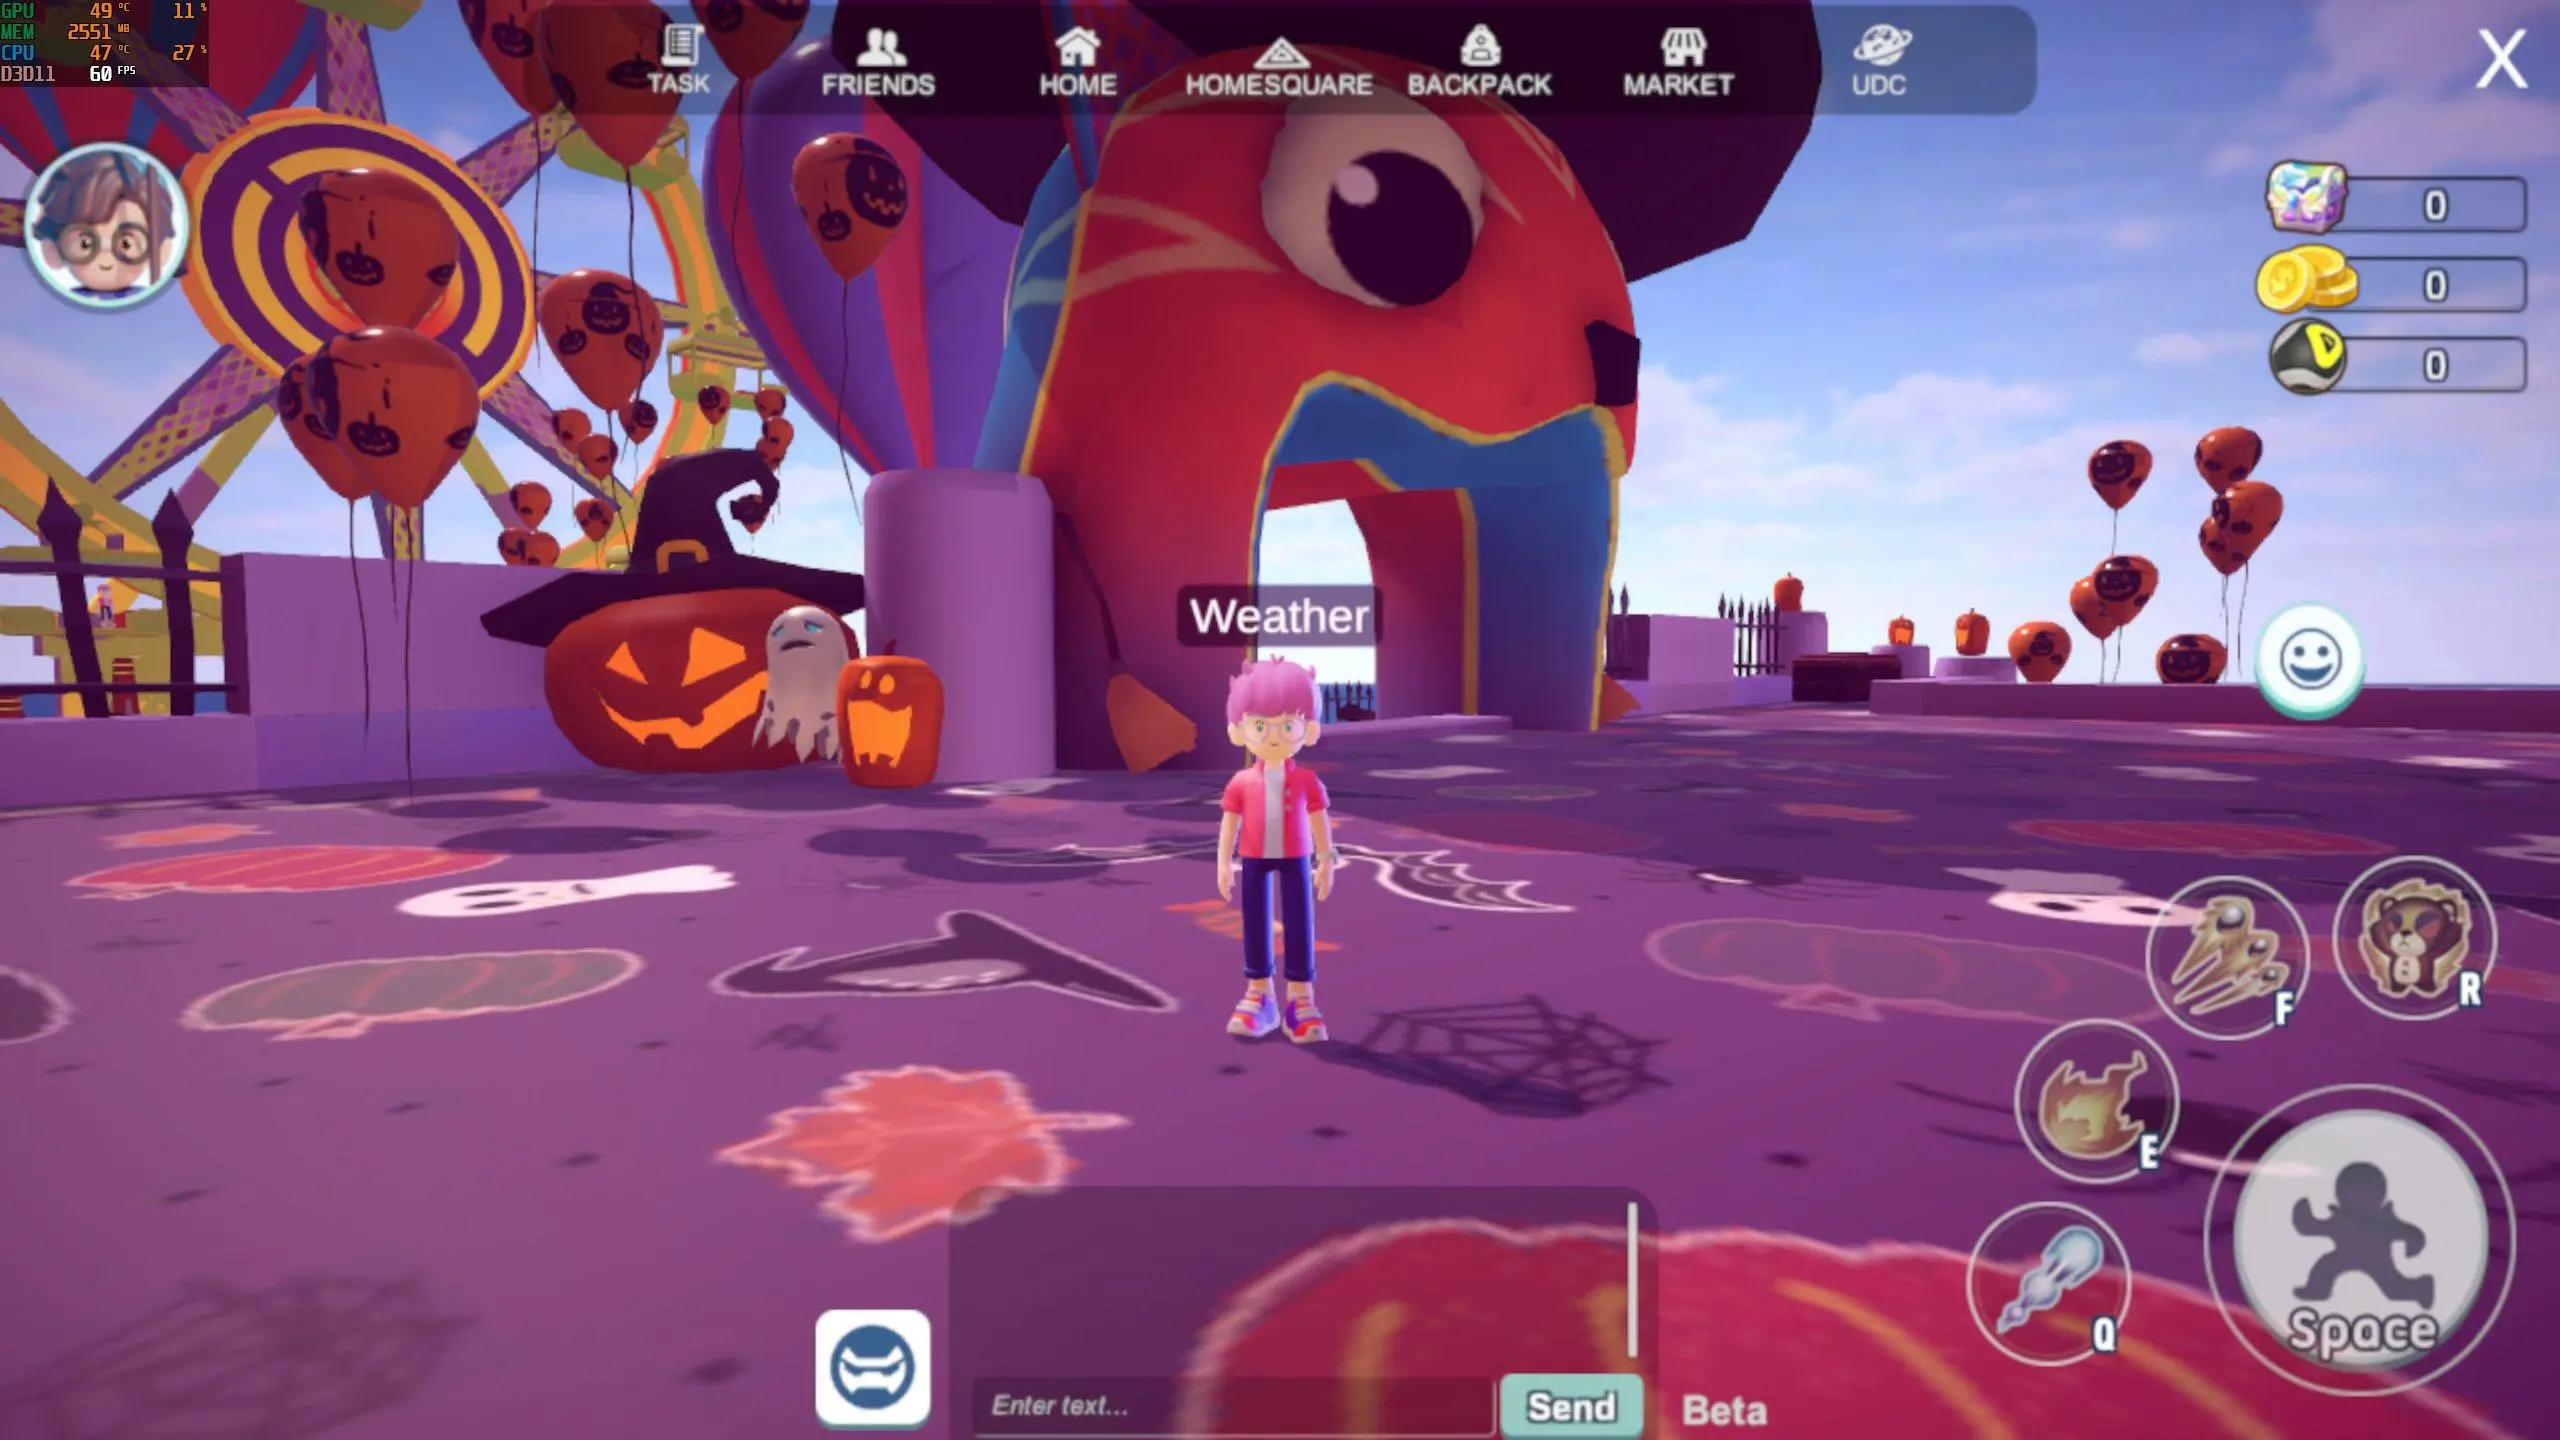 PECland: A Fresh Look into Gamefi, NFTs, and Social Immersive Metaverse